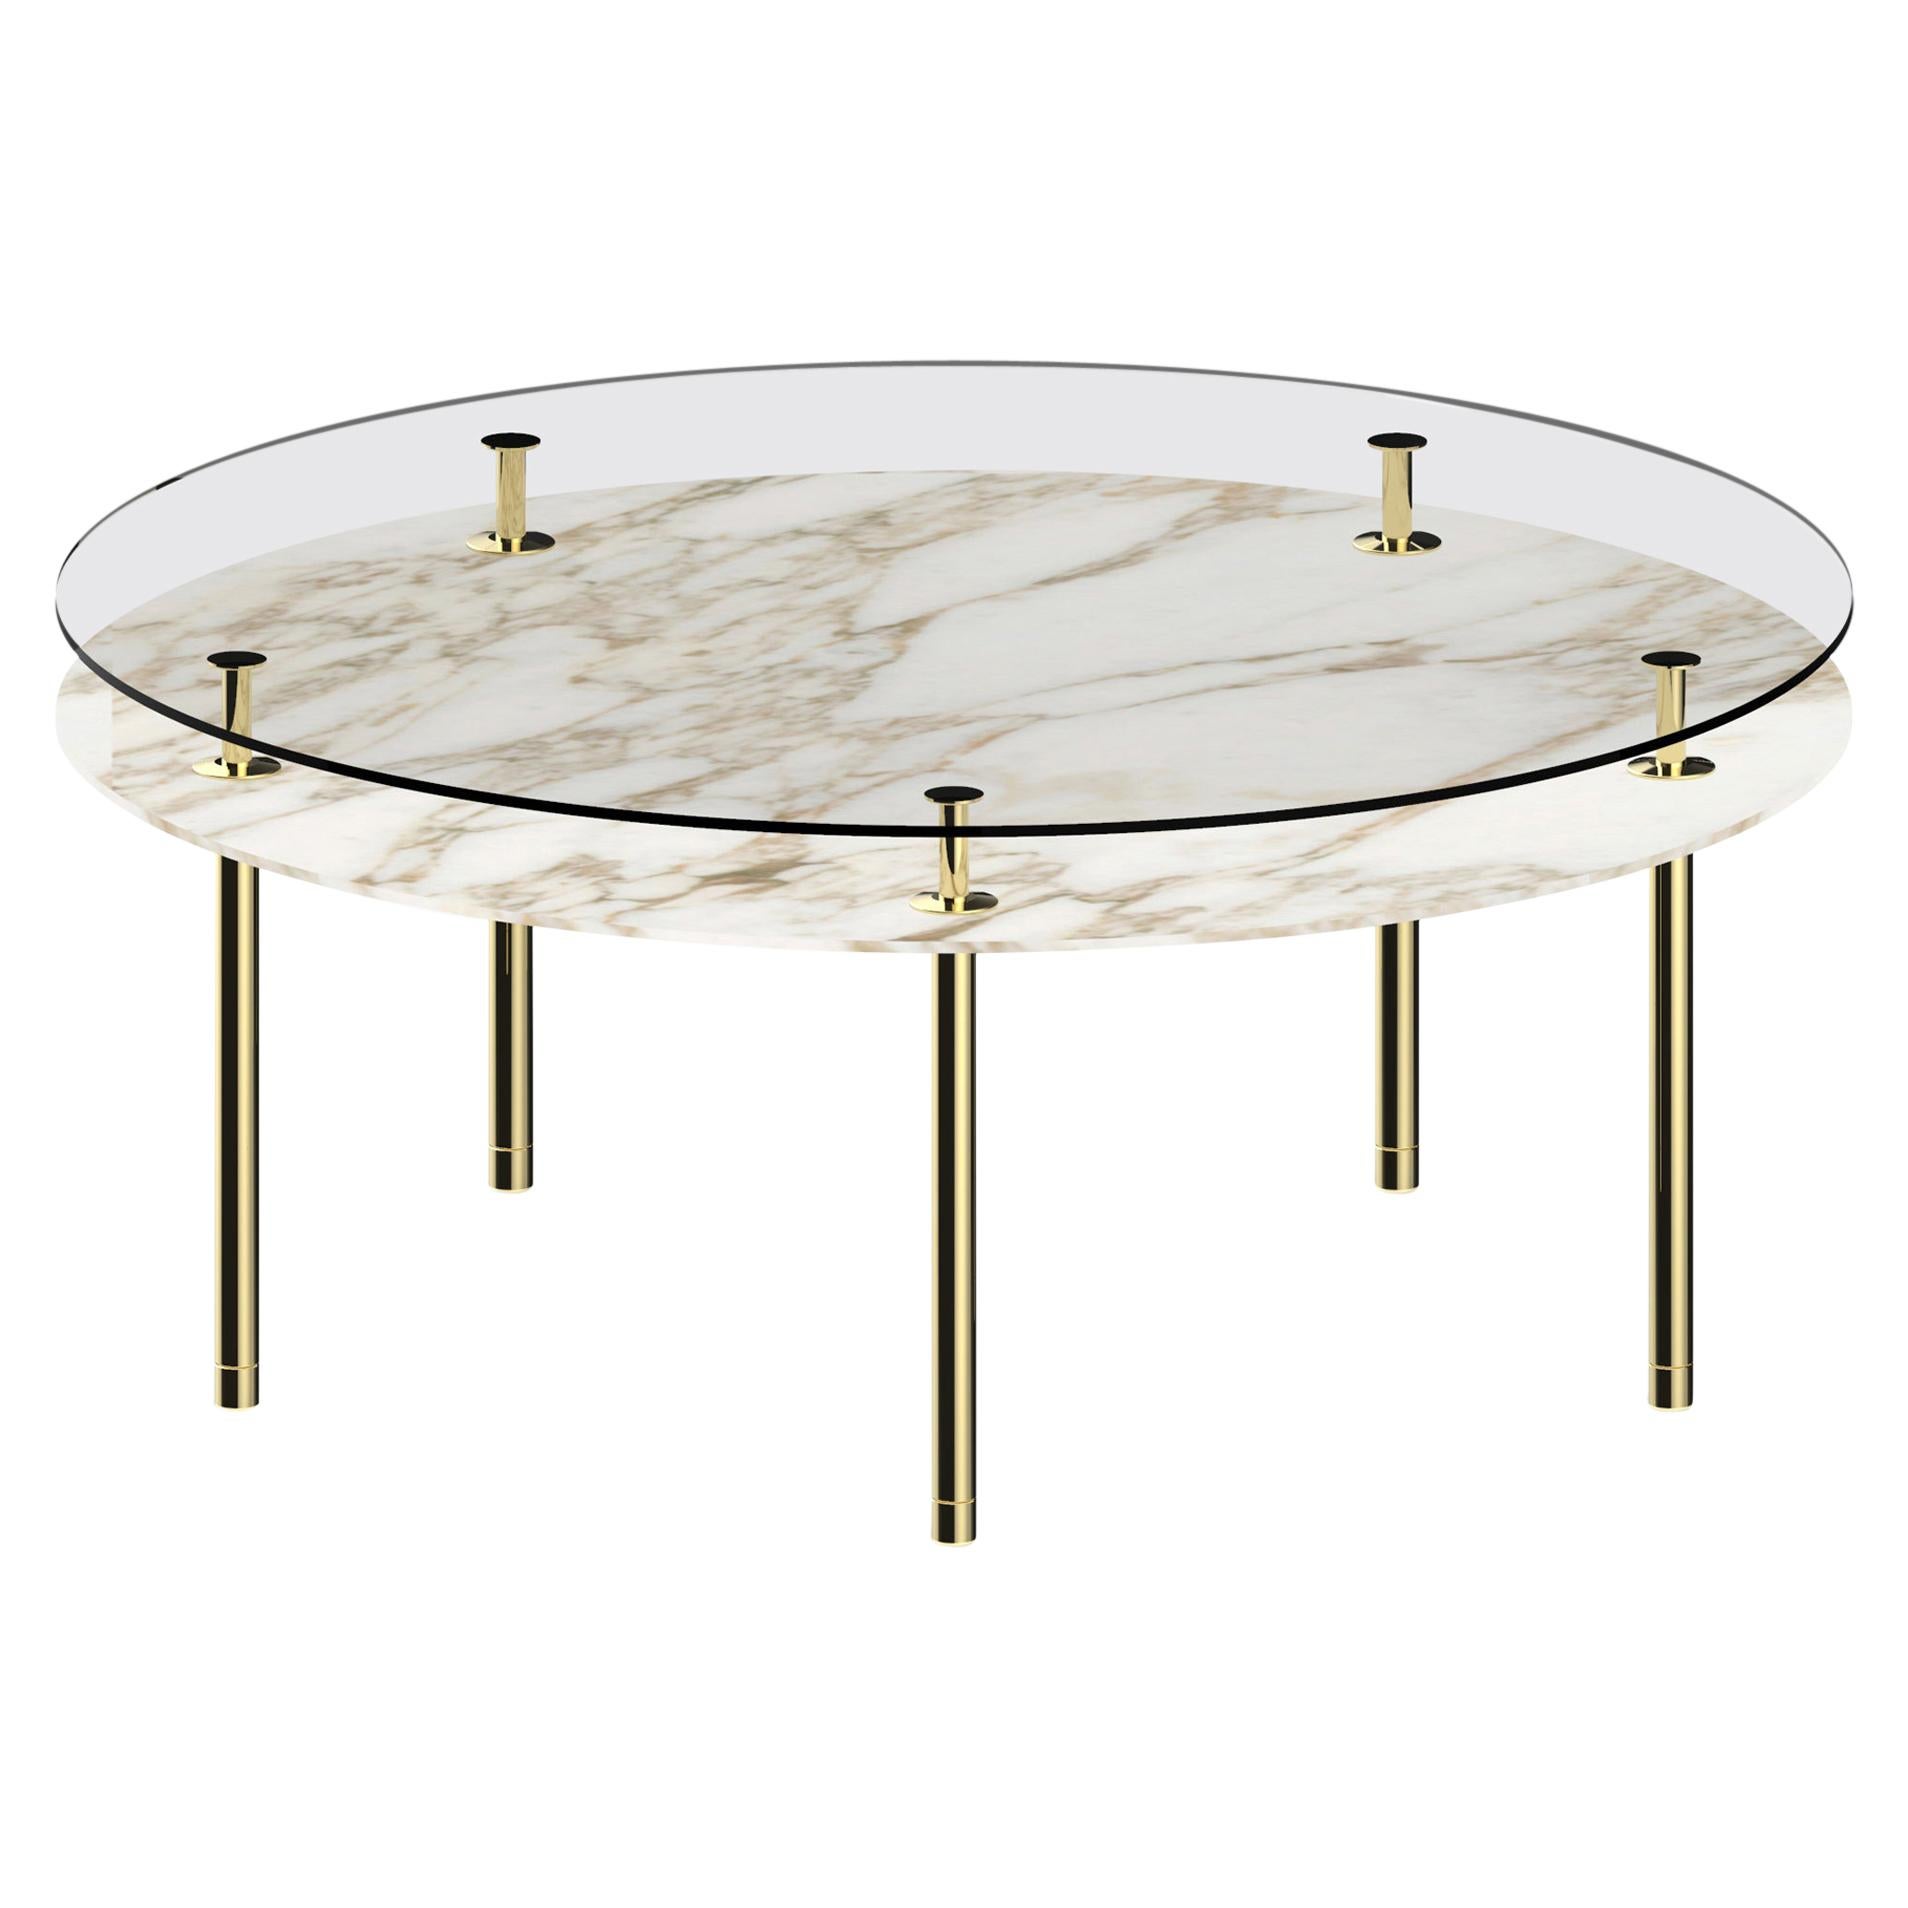 Gold (Polished Brass) Ghidini 1961 Legs Round Dining Table with Calacatta Gold Marble Top